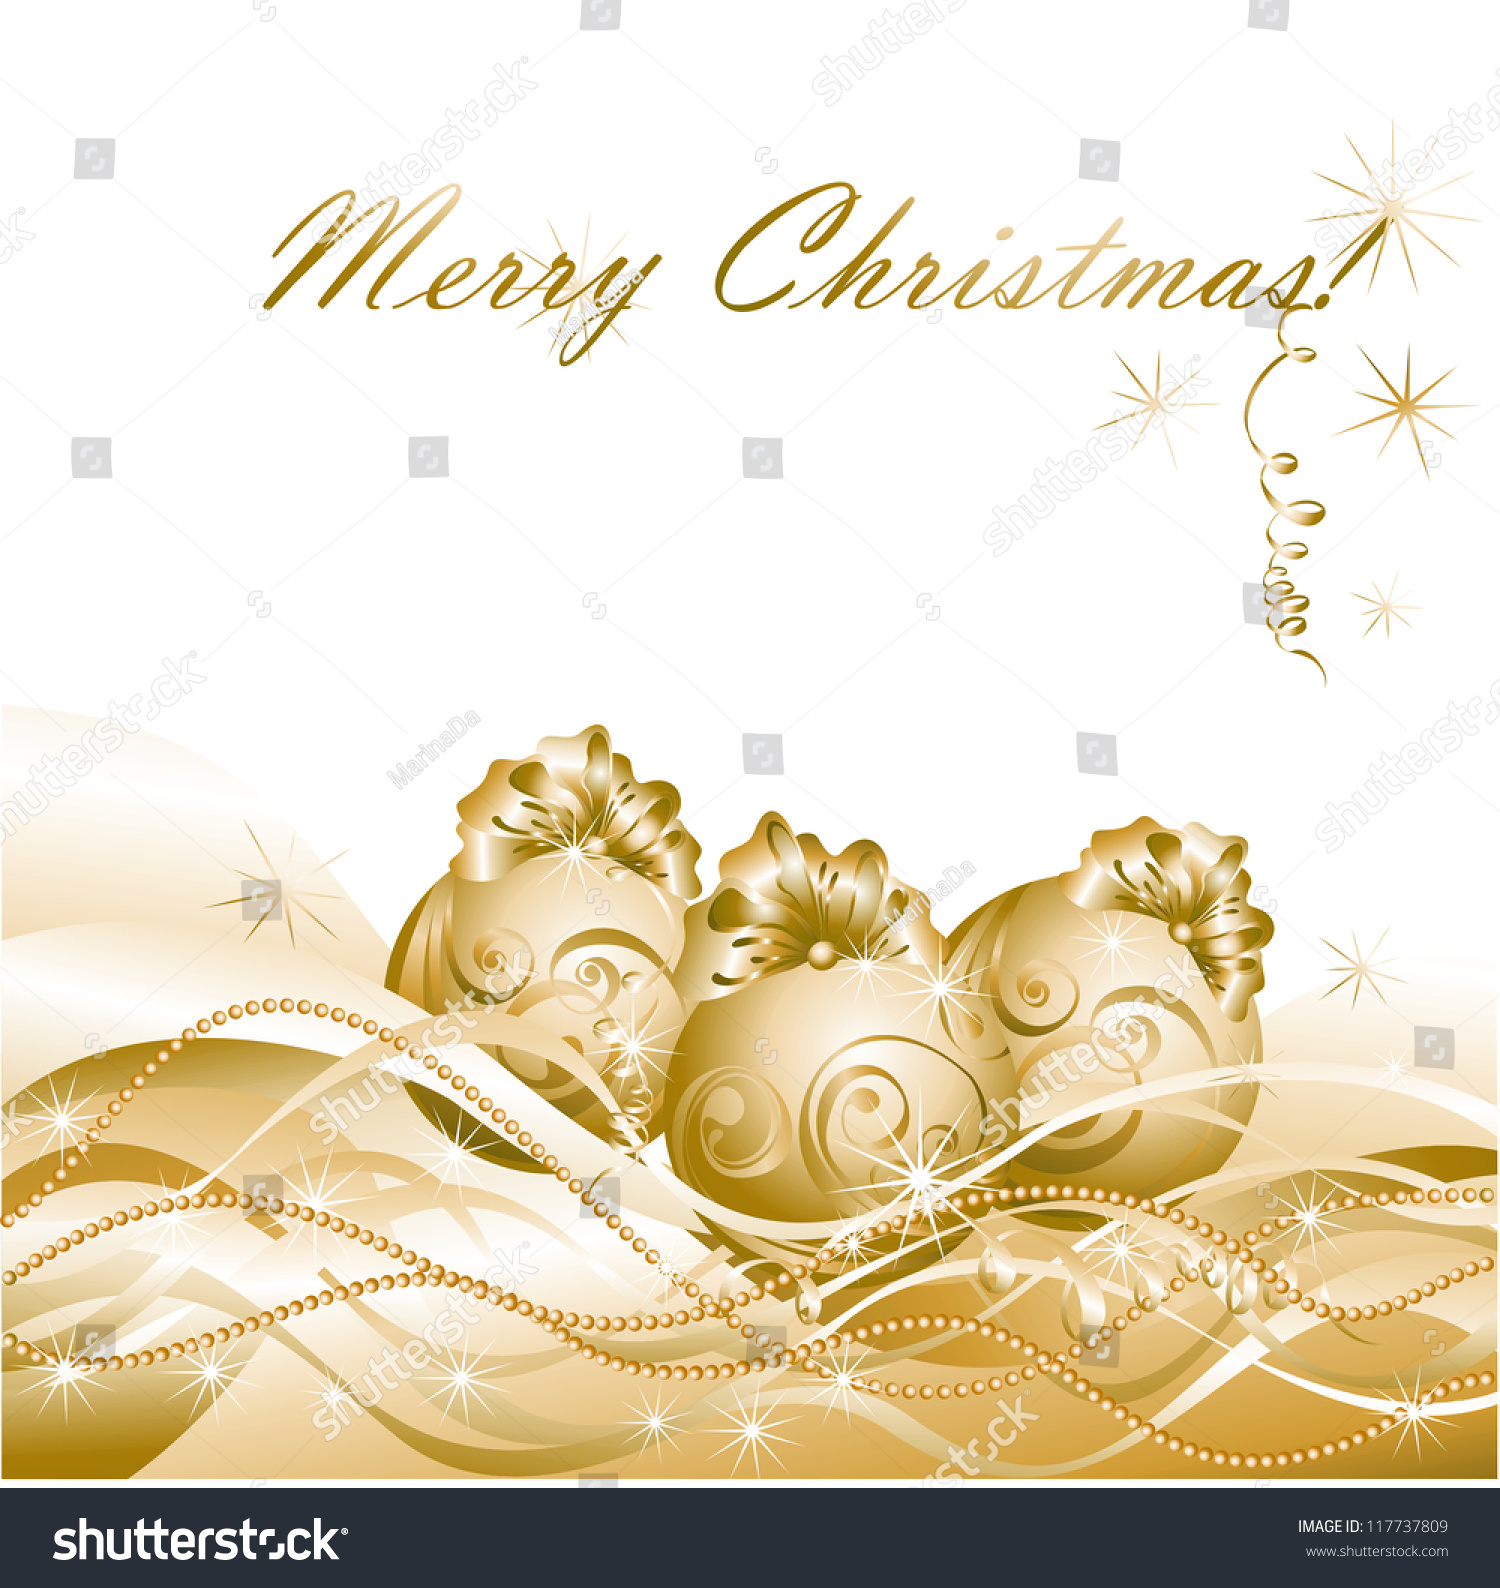 stock photo christmas background with gold evening balls